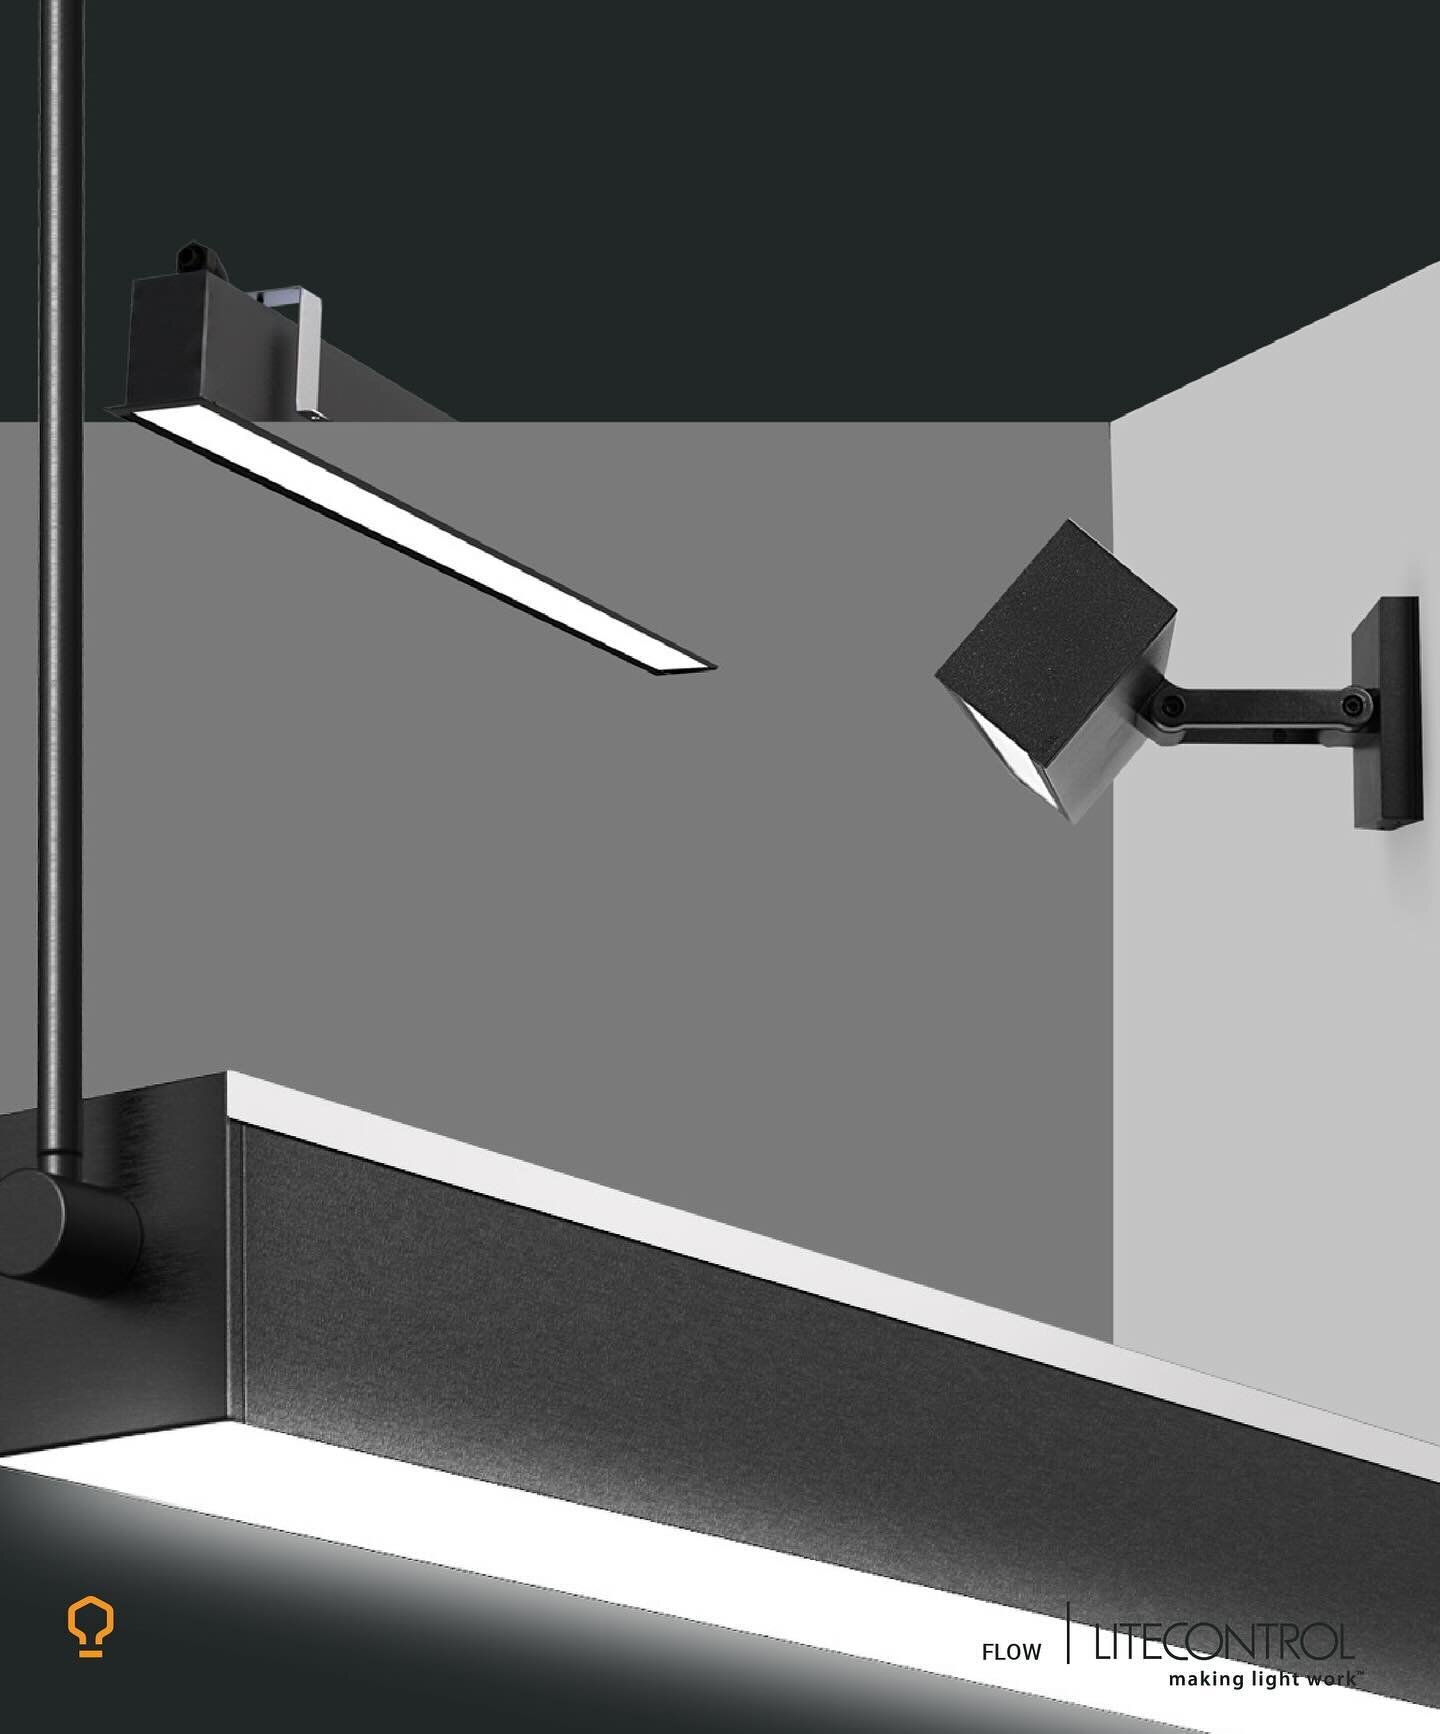 LITECONTROL |  Flow 

Flow is a line of wet-rated rectilinear luminaires which shares similar design language as your favorite indoor Litecontrol products, offering design consistency across all of your indoor and outdoor configurations. 

Variable I